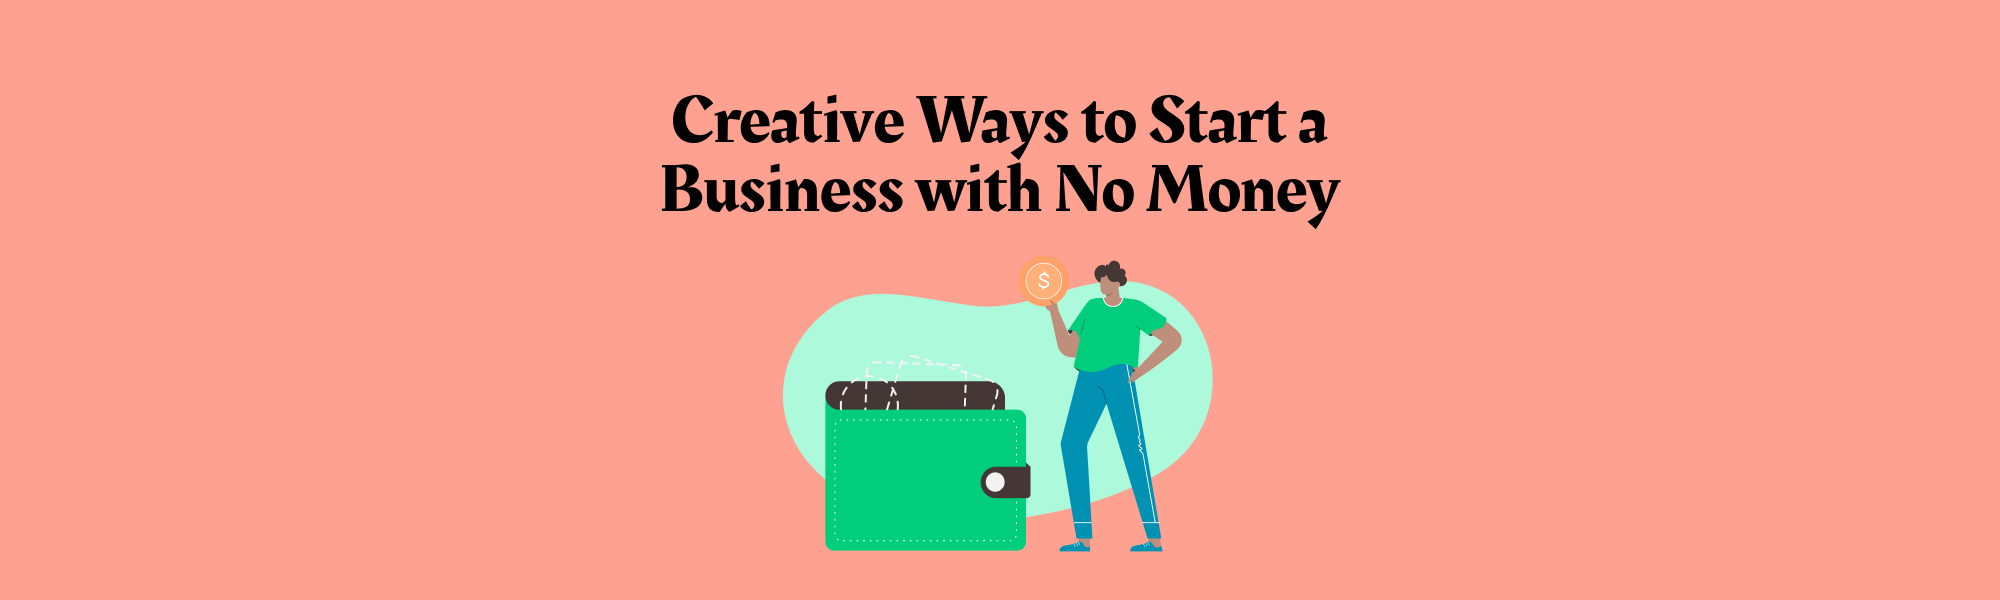 creative-ways-to-start-a-business-with-no-money